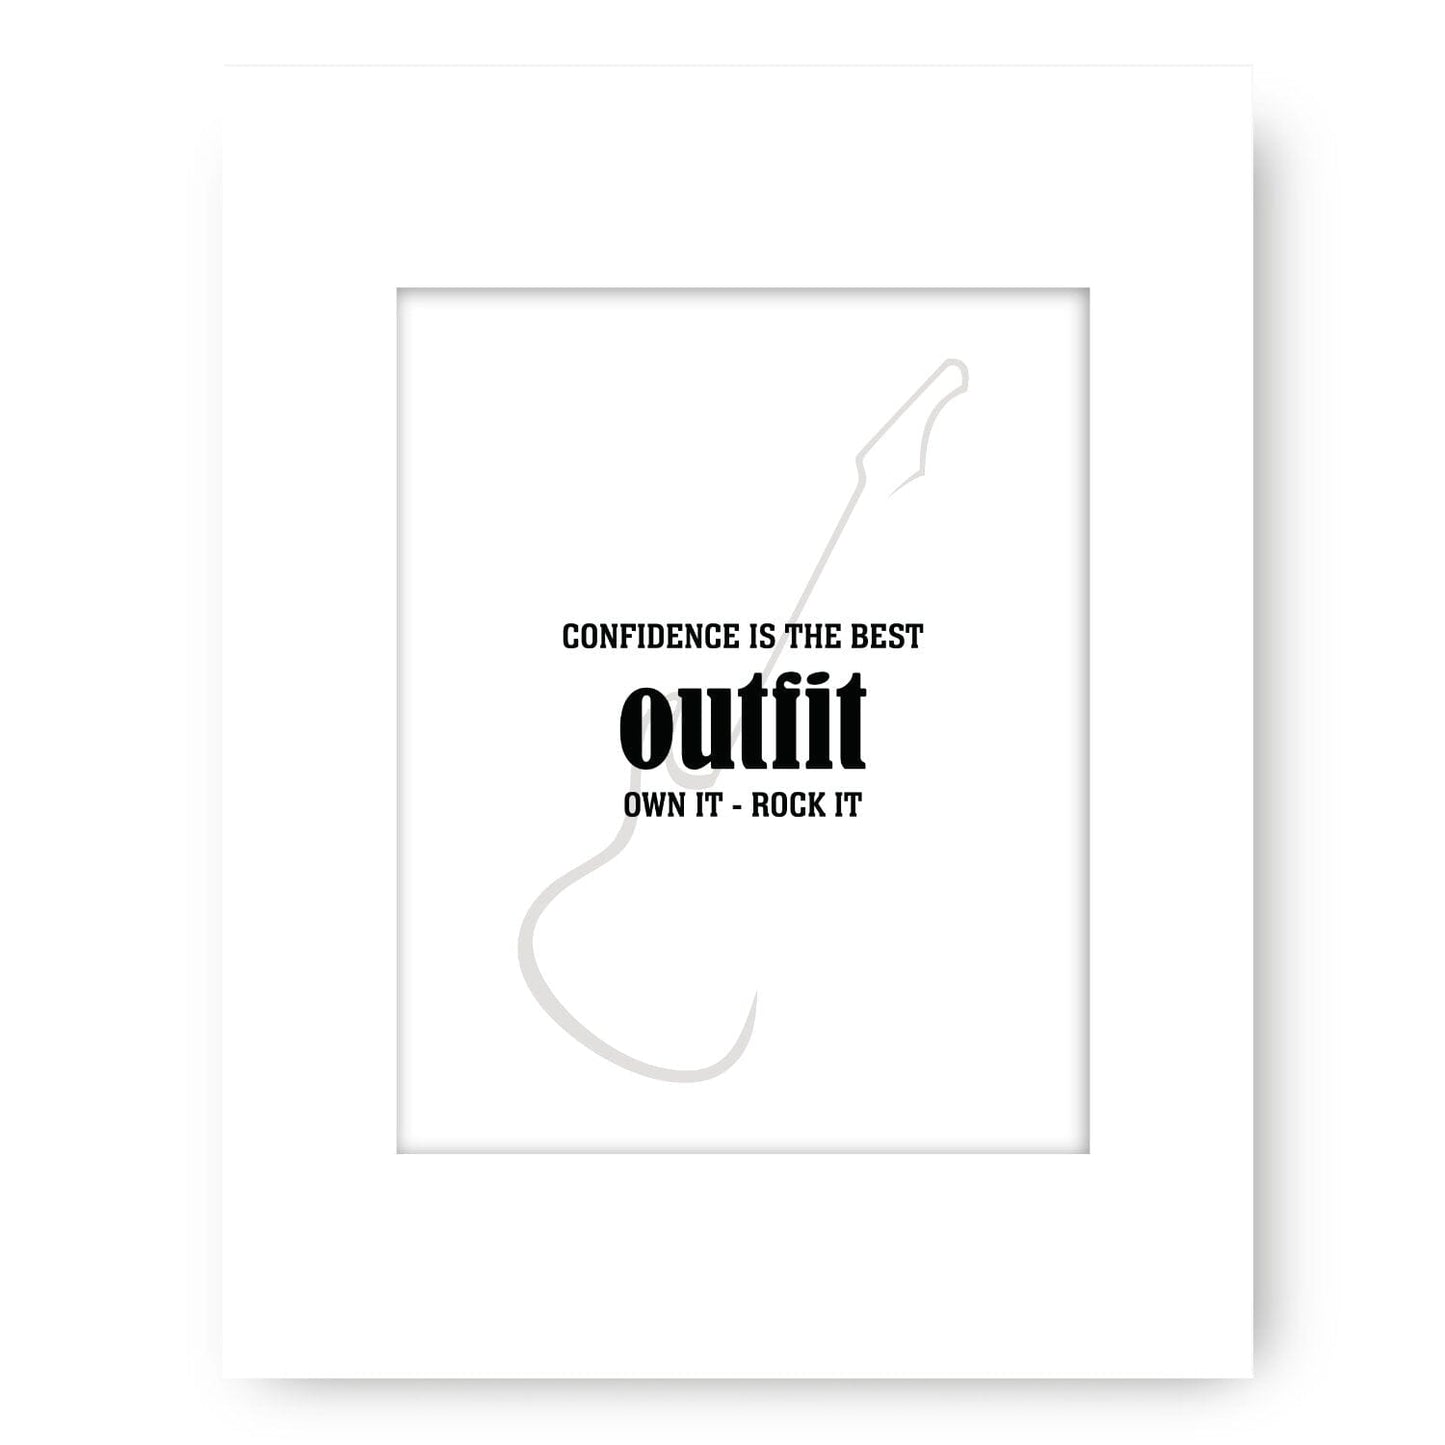 Wise & Witty Art - Confidence is the Best Outfit Own It Rock It Wise and Wiseass Quotes Song Lyrics Art 8x10 White Matted Print 